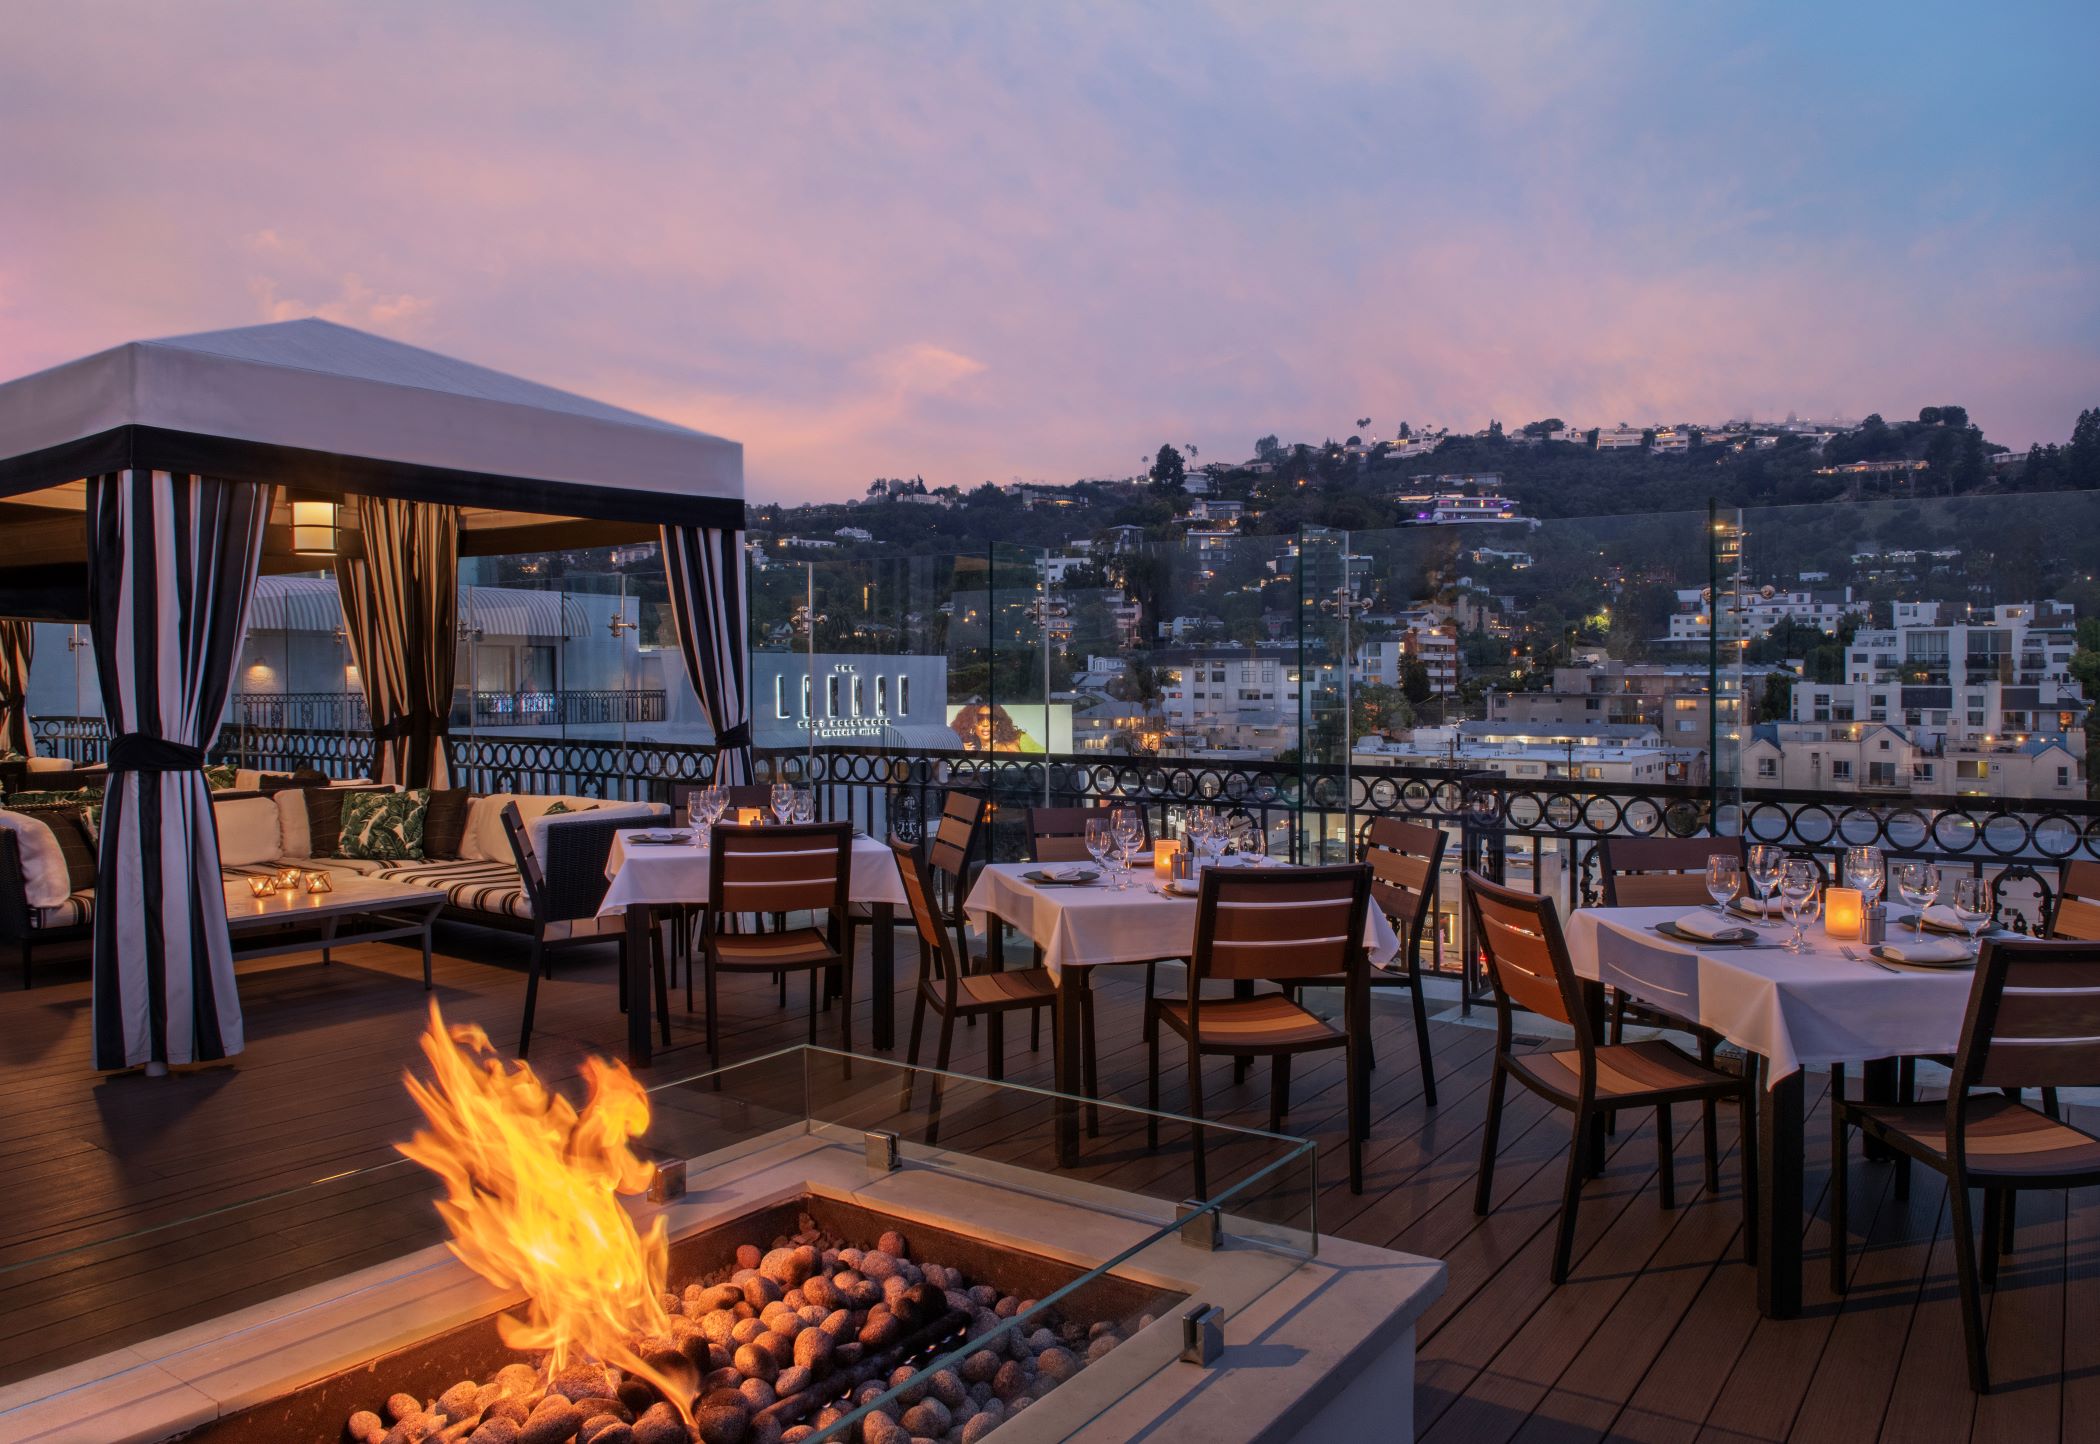 An image of the London WeHo rooftop.